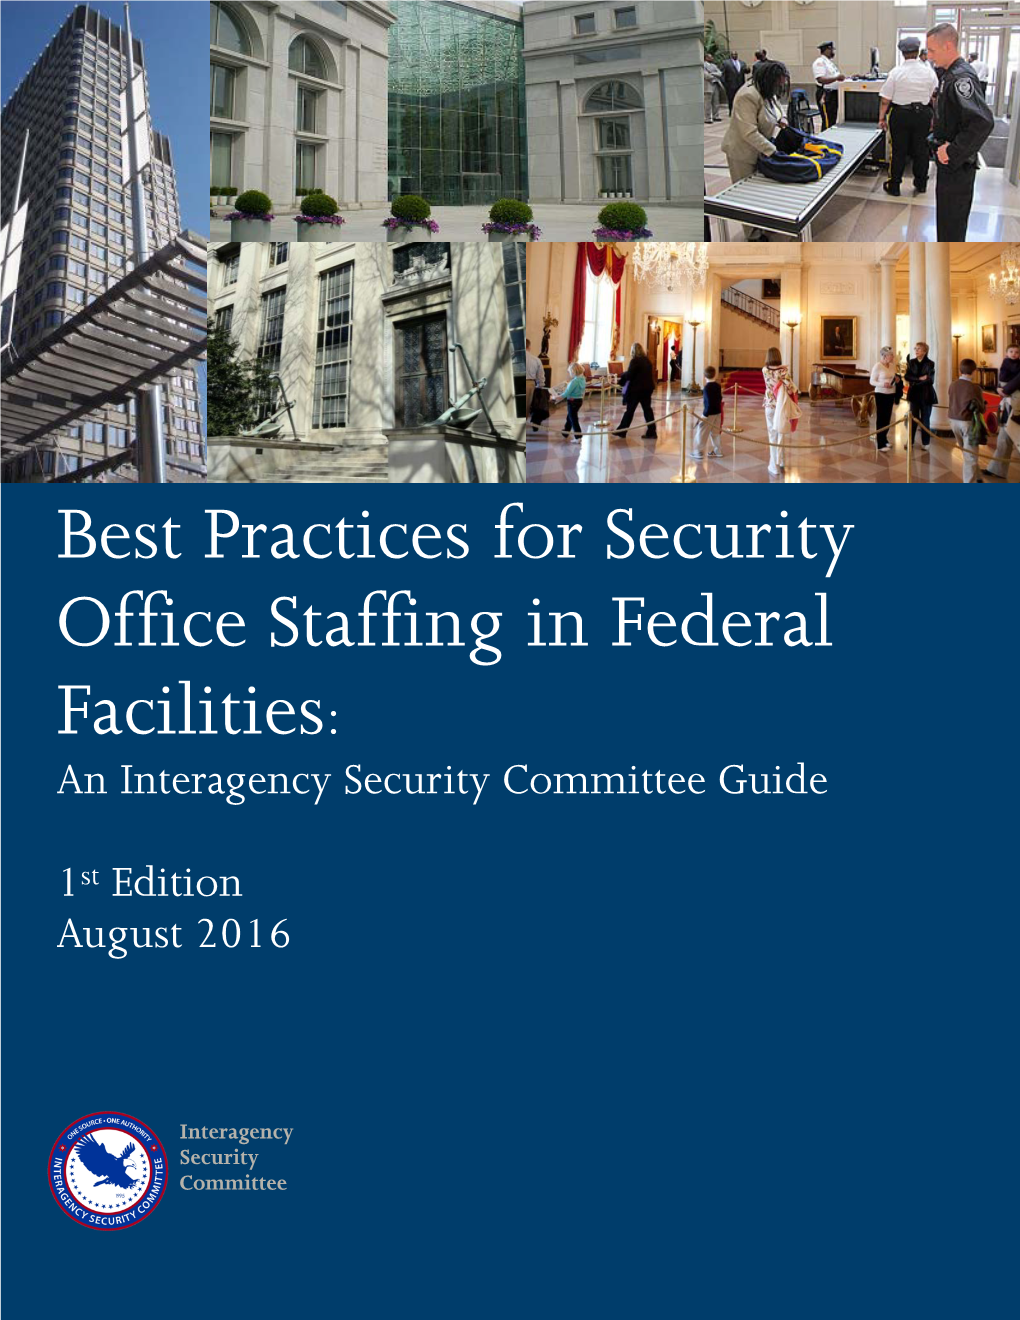 Best Practices for Security Office Staffing in Federal Facilities I